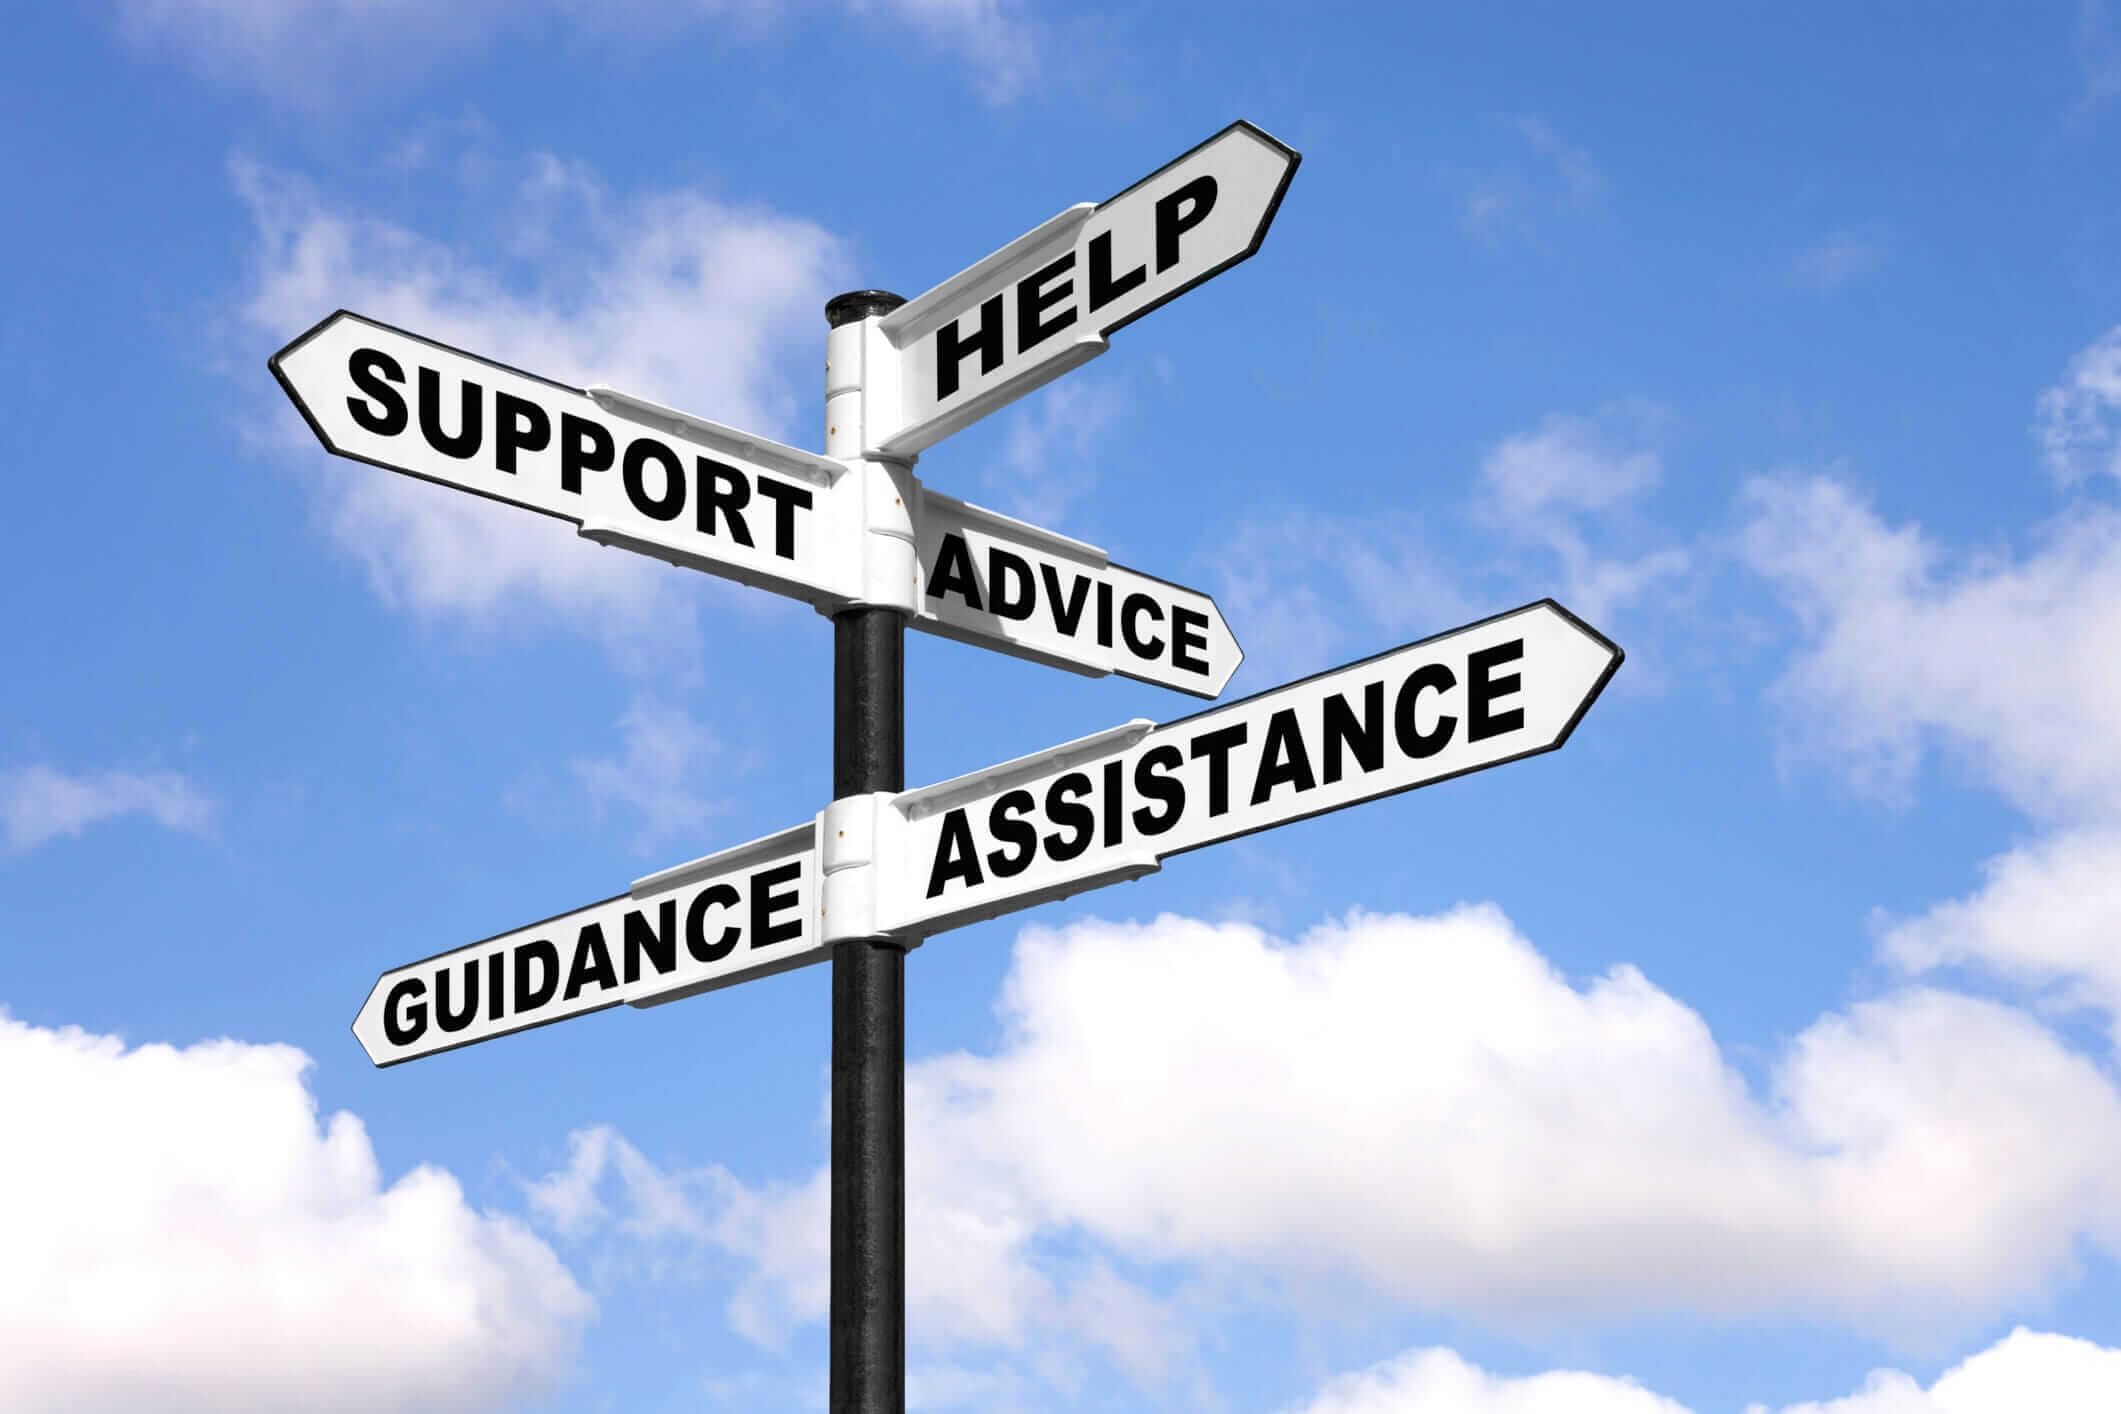 Help, Support, Advice, Guidance, and Assistance Cross Road Sign Image